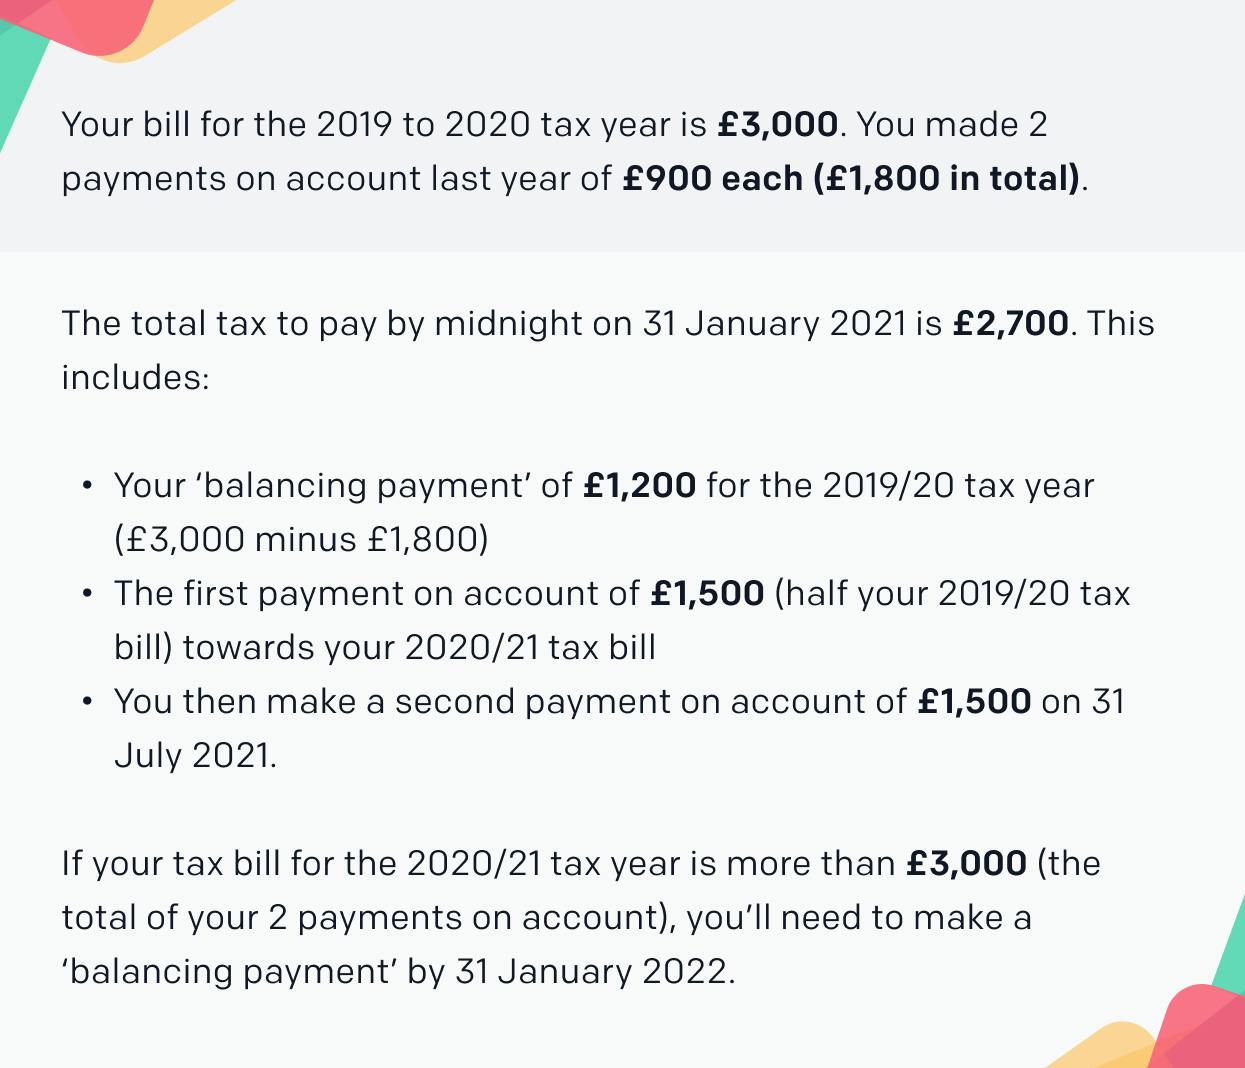 Your bill for the 2019 to 2020 tax year is £3,000. You made 2 payments on account last year of £900 each (£1,800 in total).

The total tax to pay by midnight on 31 January 2021 is £2,700. This includes:

Your ‘balancing payment’ of £1,200 for the 2019 to 2020 tax year (£3,000 minus £1,800)

The first payment on account of £1,500 (half your 2019 to 2020 tax bill) towards your 2020 to 2021 tax bill

You then make a second payment on account of £1,500 on 31 July 2021.

If your tax bill for the 2020 to 2021 tax year is more than £3,000 (the total of your 2 payments on account), you’ll need to make a ‘balancing payment’ by 31 January 2022.